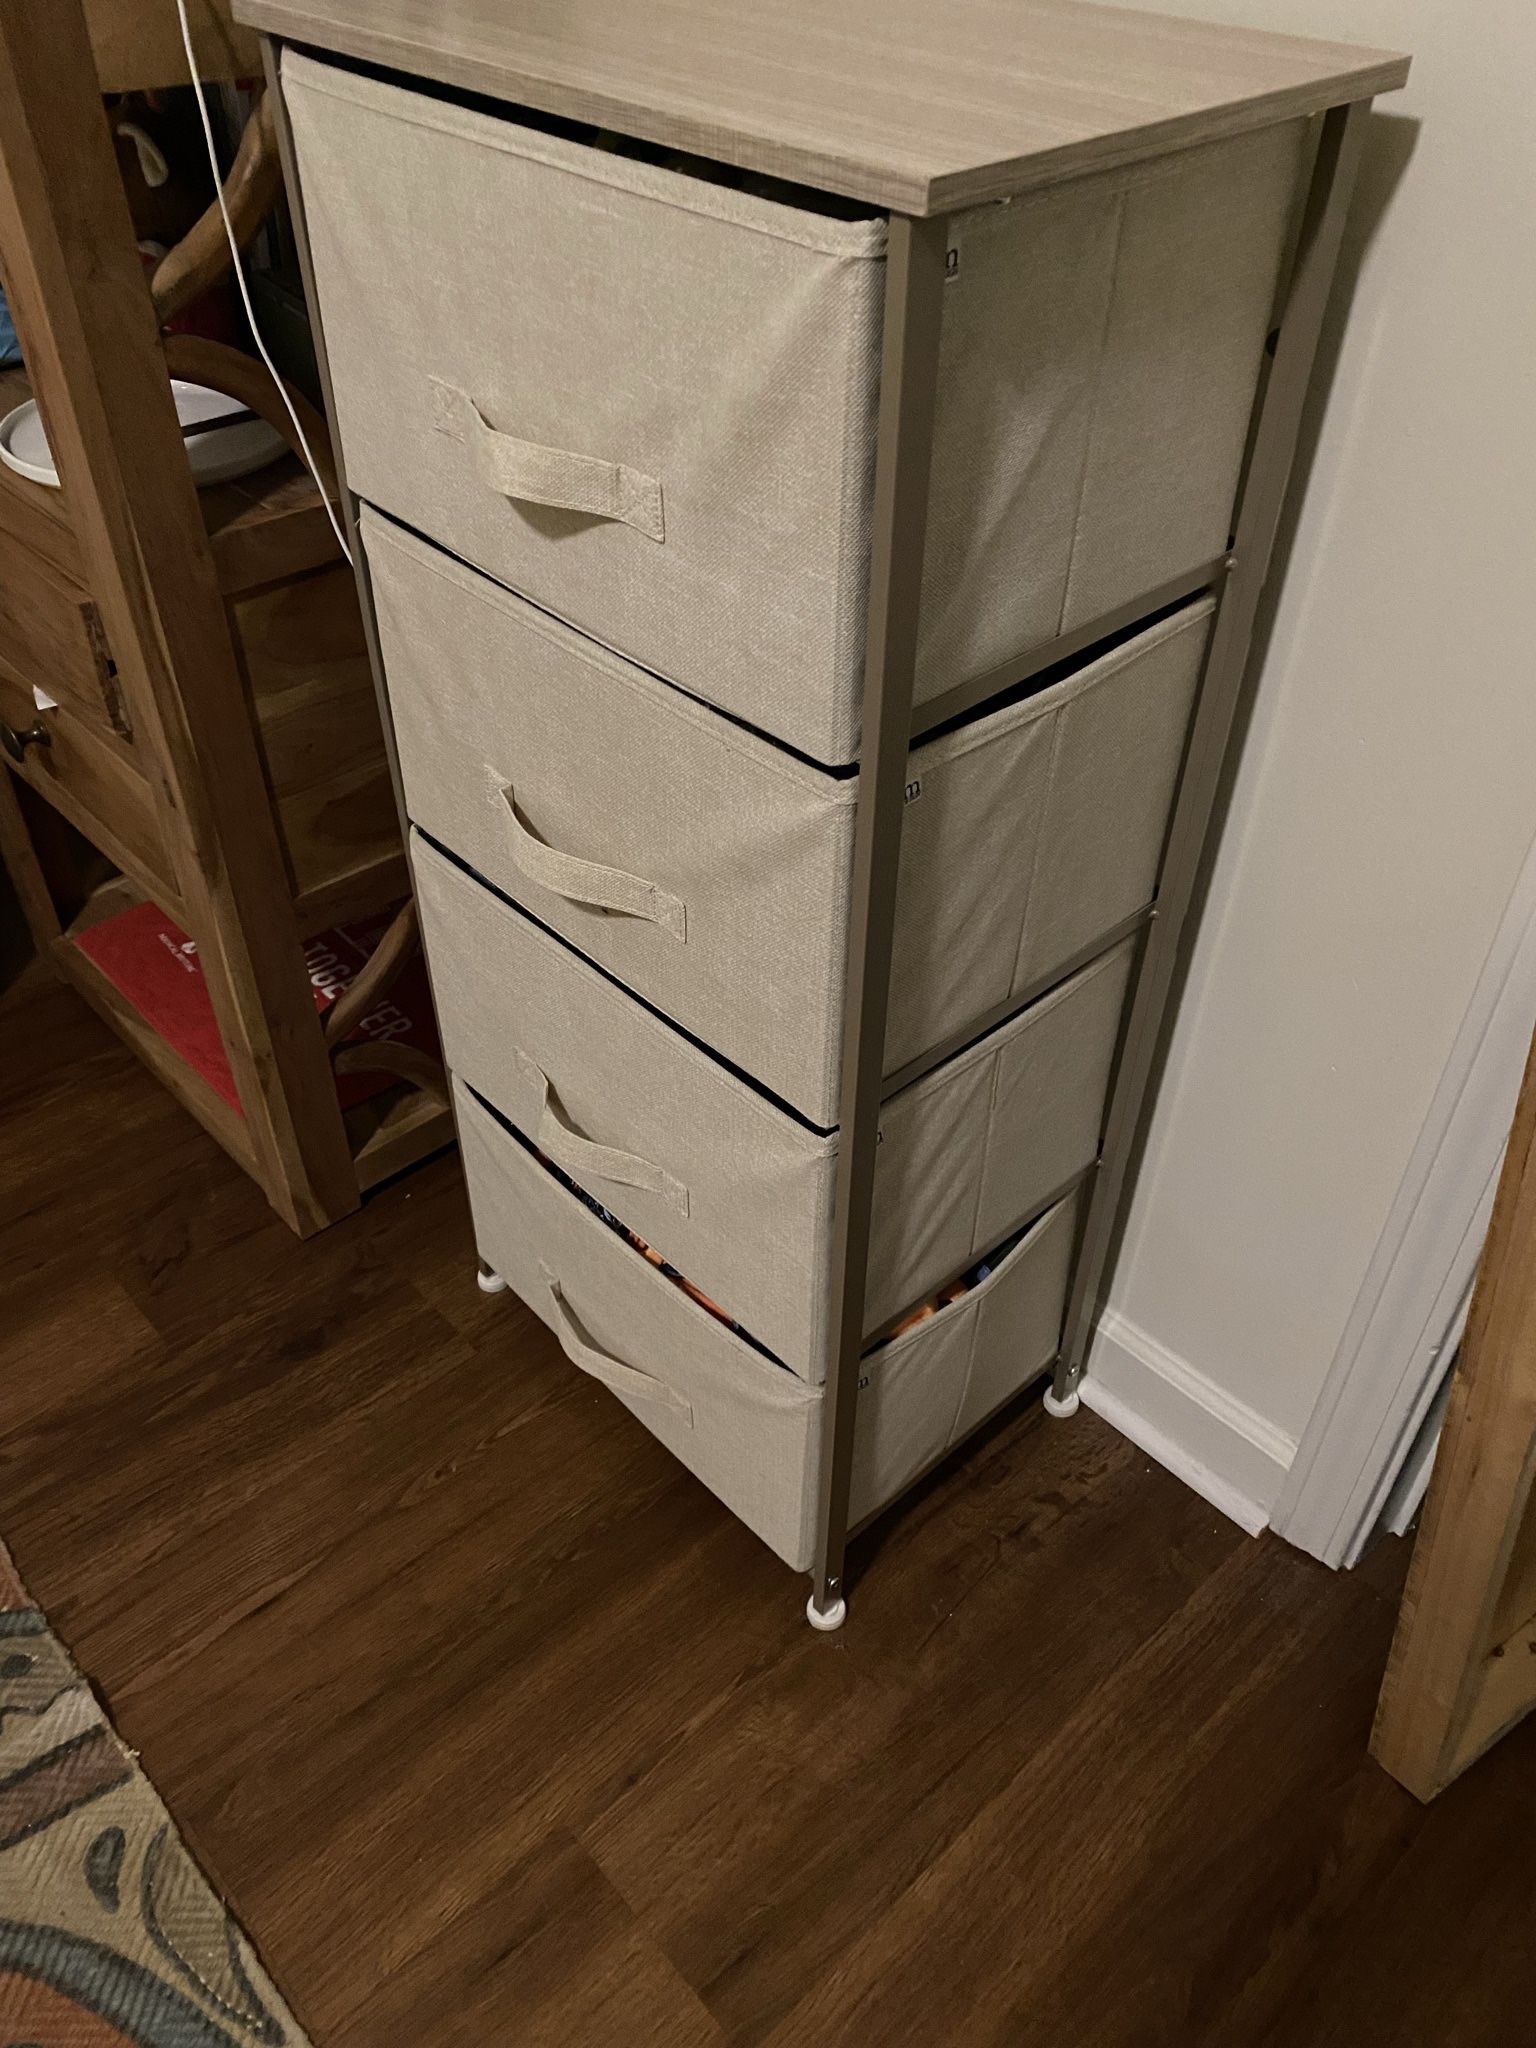 Beige rolling cloth cart with drawers